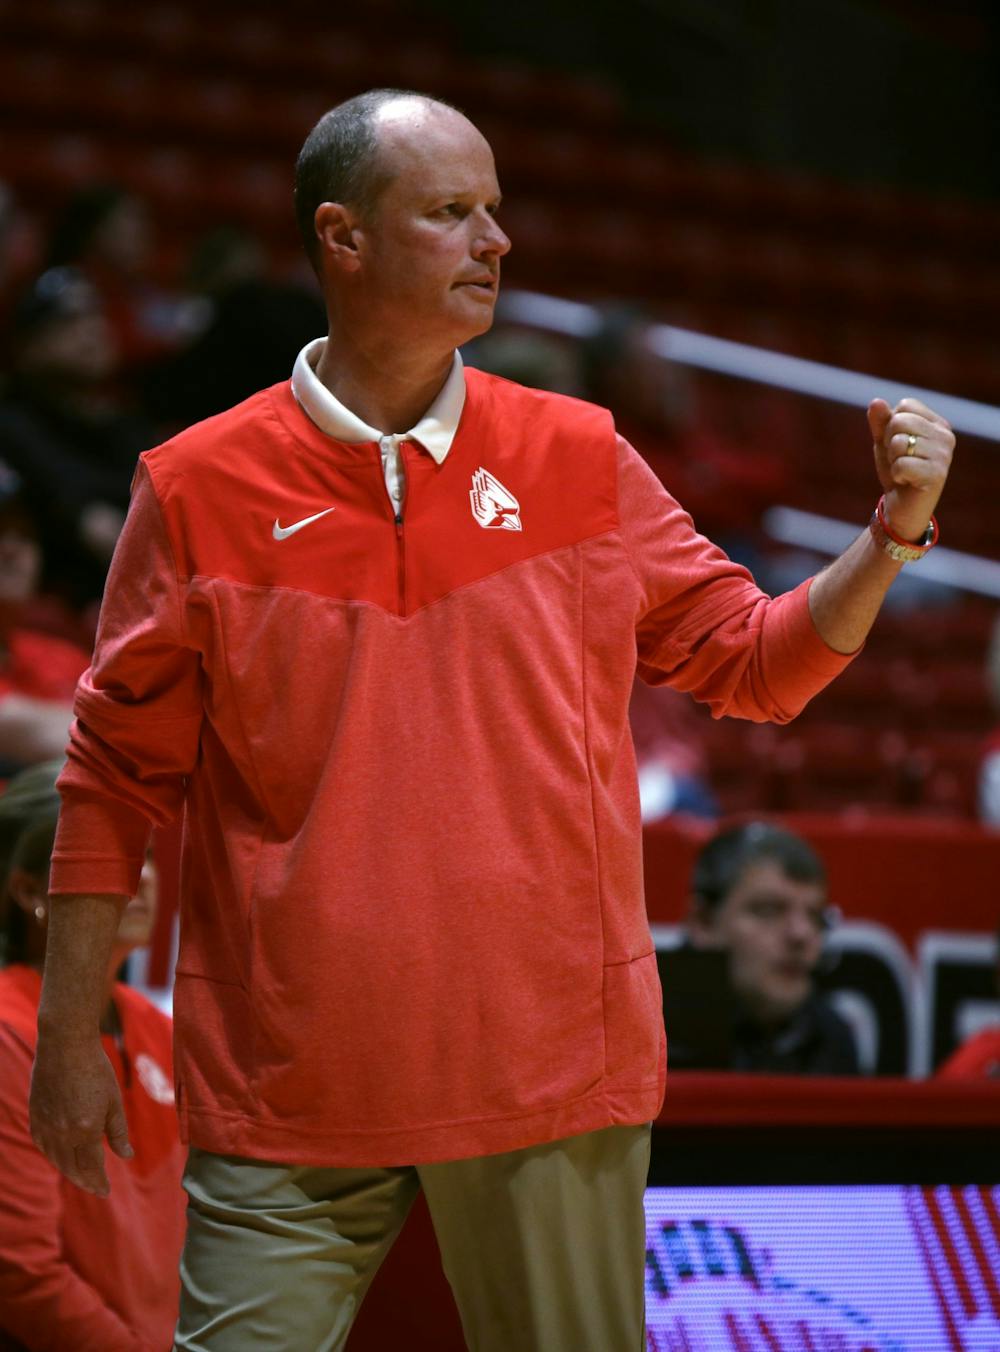 Sallee earns 200th win as a Cardinal in Ball State Women's Basketball's victory over Ohio